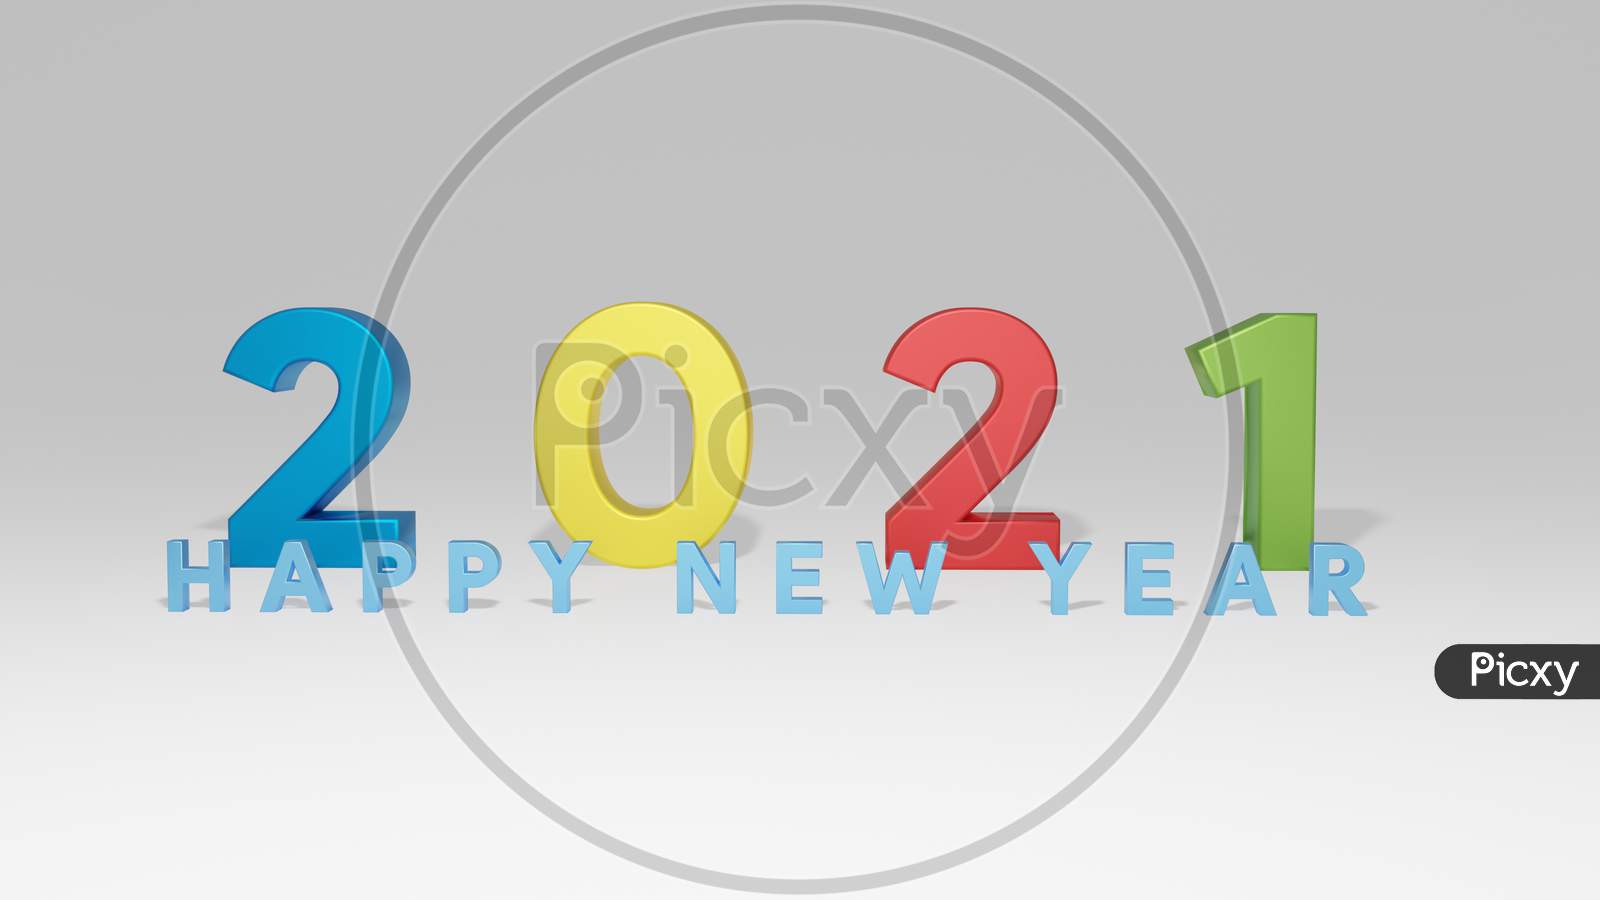 2021 happy new year background with colorful blue yellow red green with colored numbers and text . 3d illustration rendering